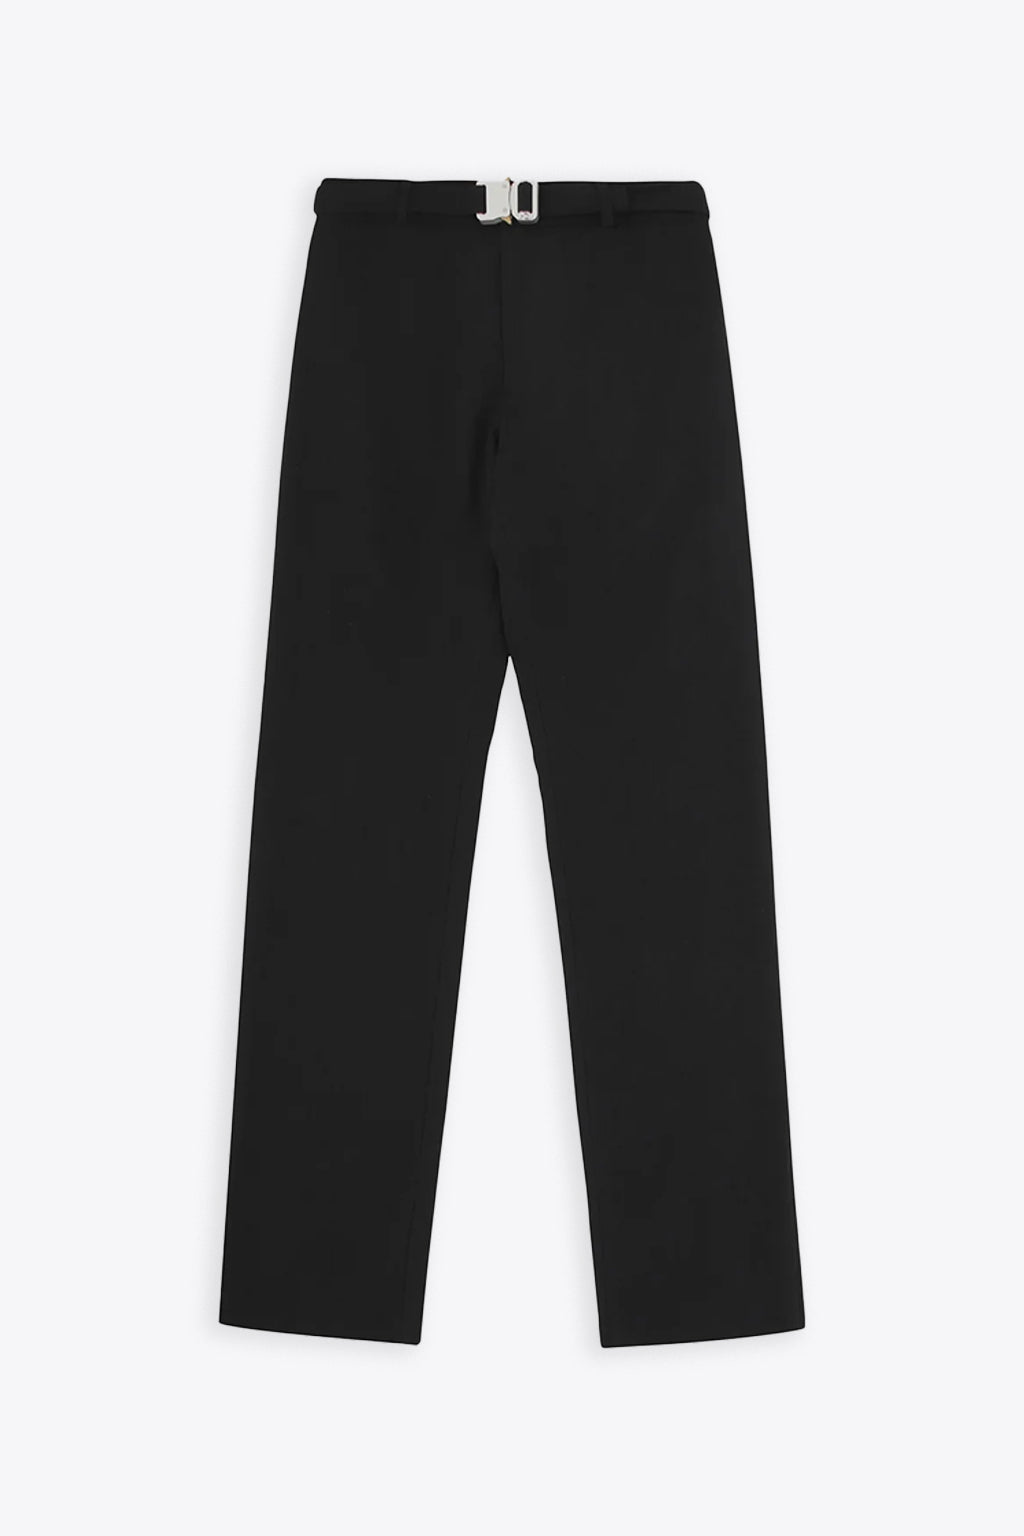 alt-image__Black-tailored-pant-with-rollecoaster-buckle---Metal-buckle-suitpant-